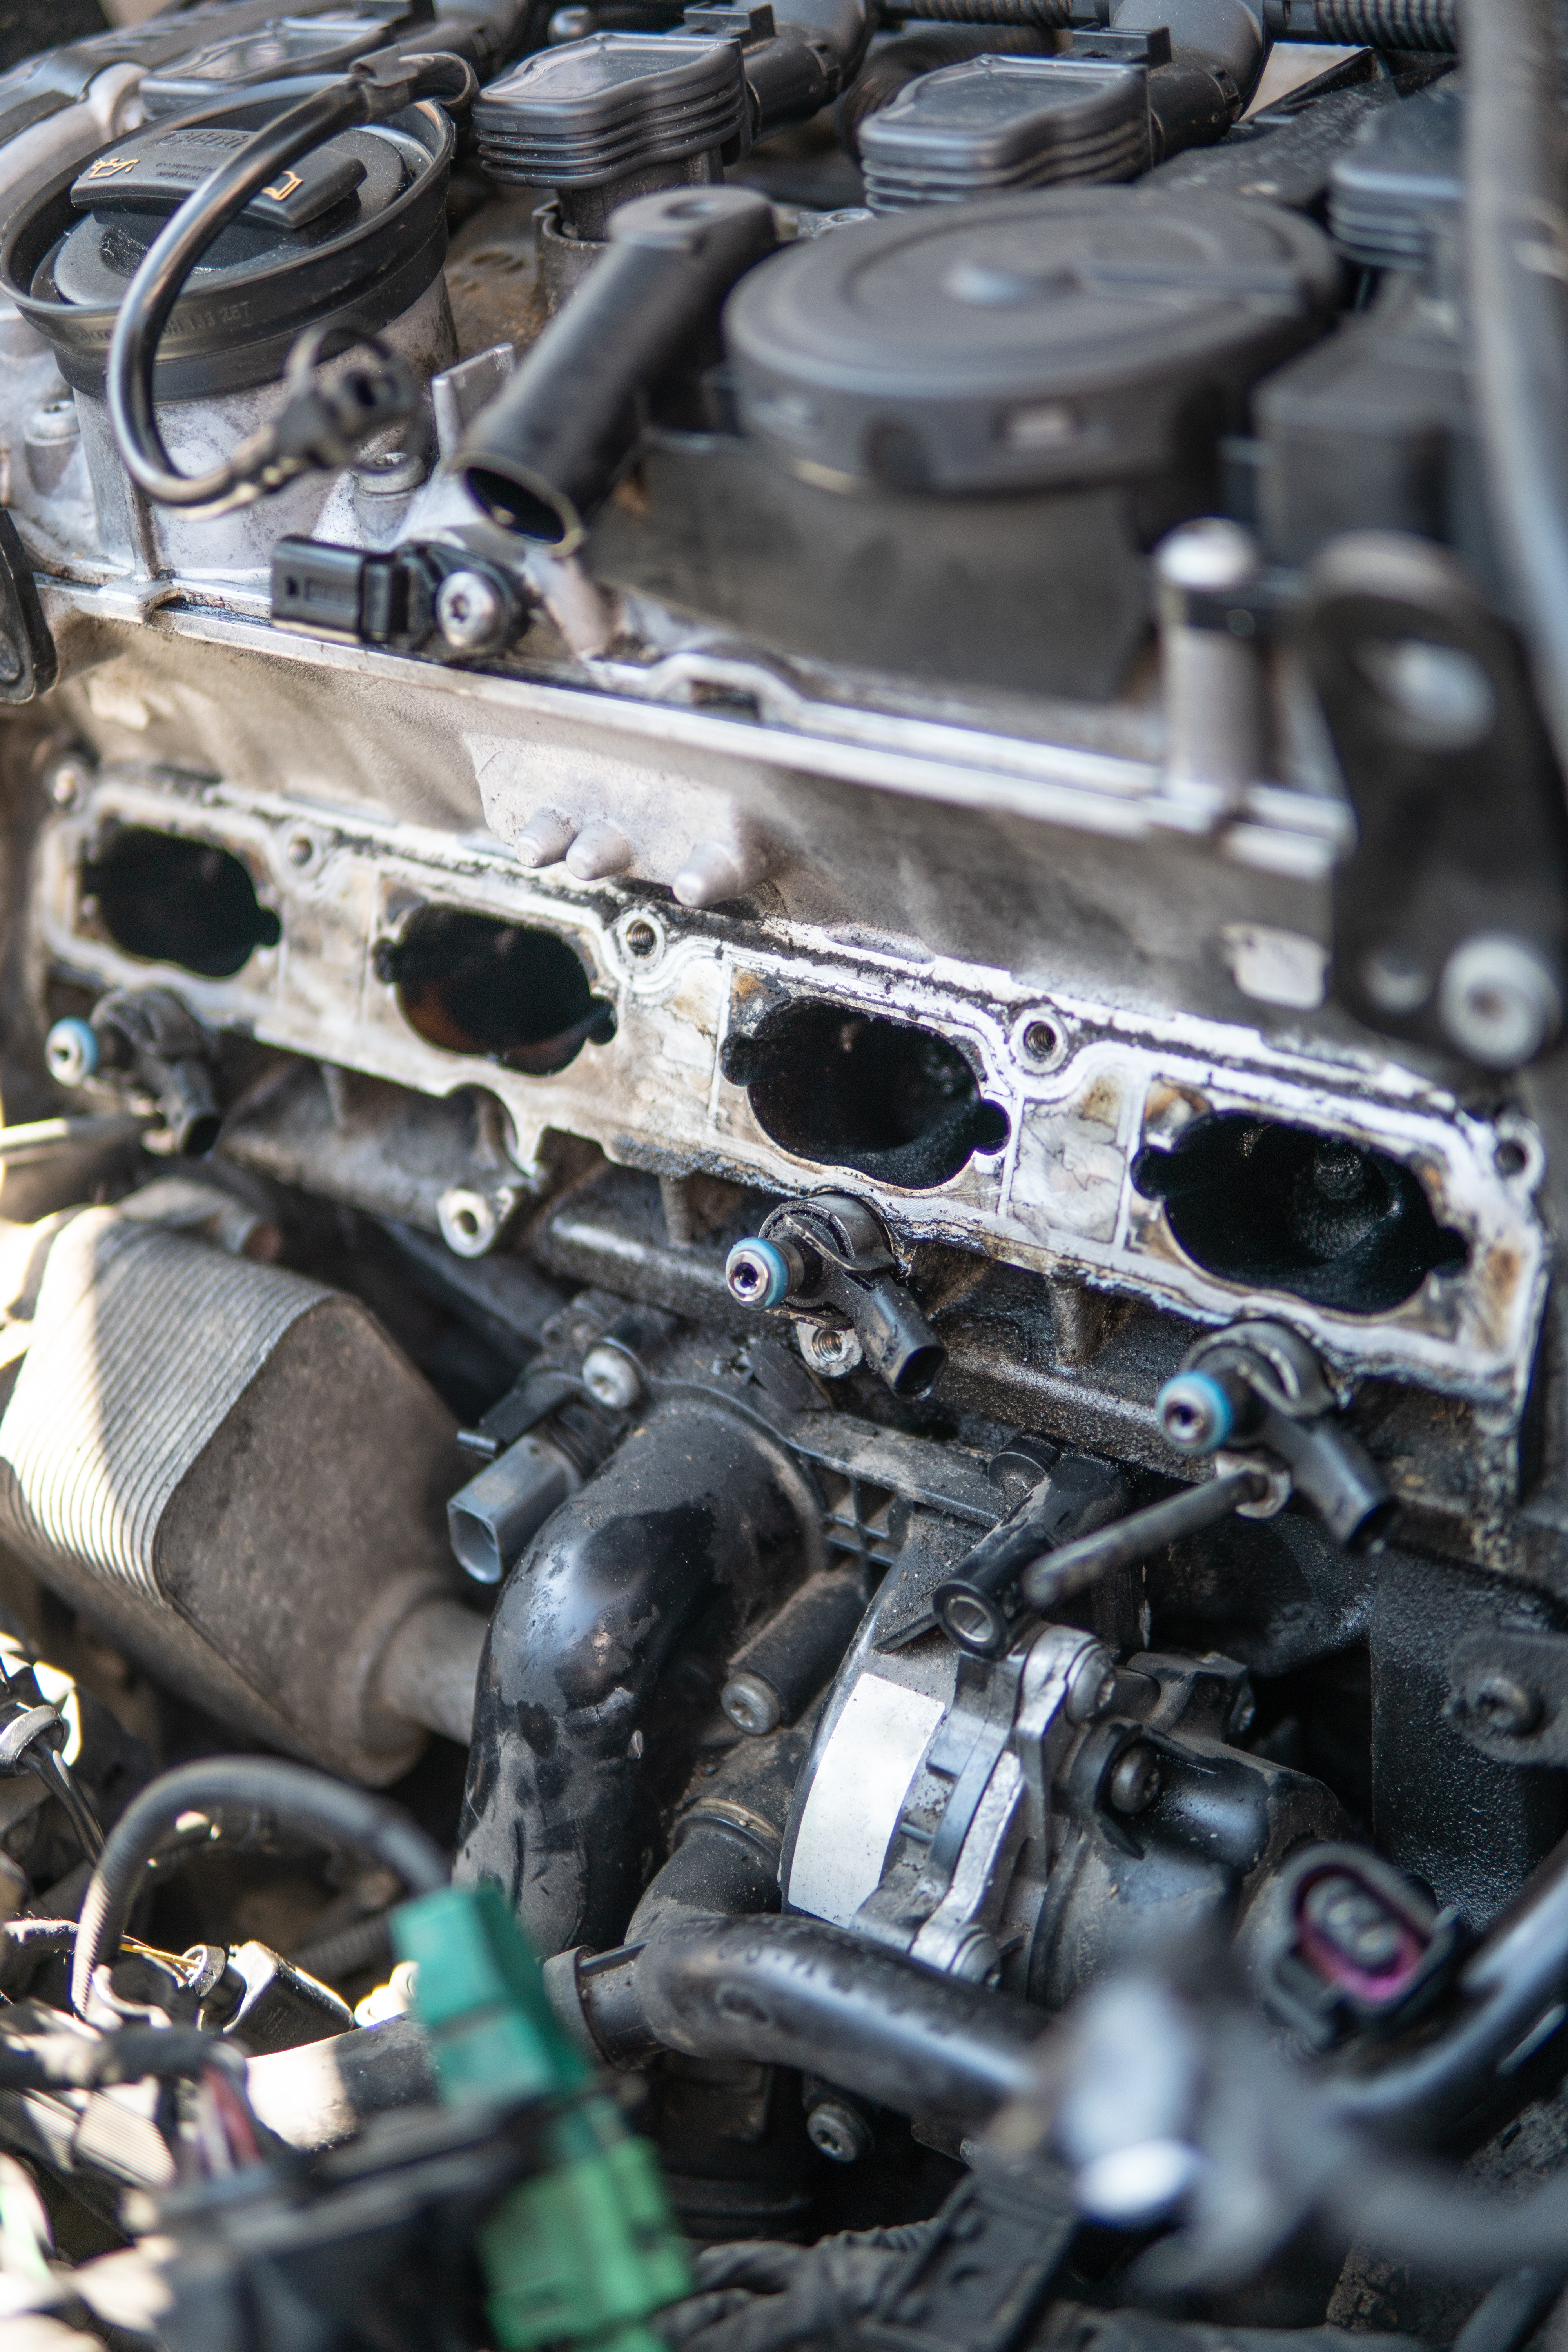 An image of a dirty intake manifold but DPF Alternatives can help with our expert intake manifold cleaning service.